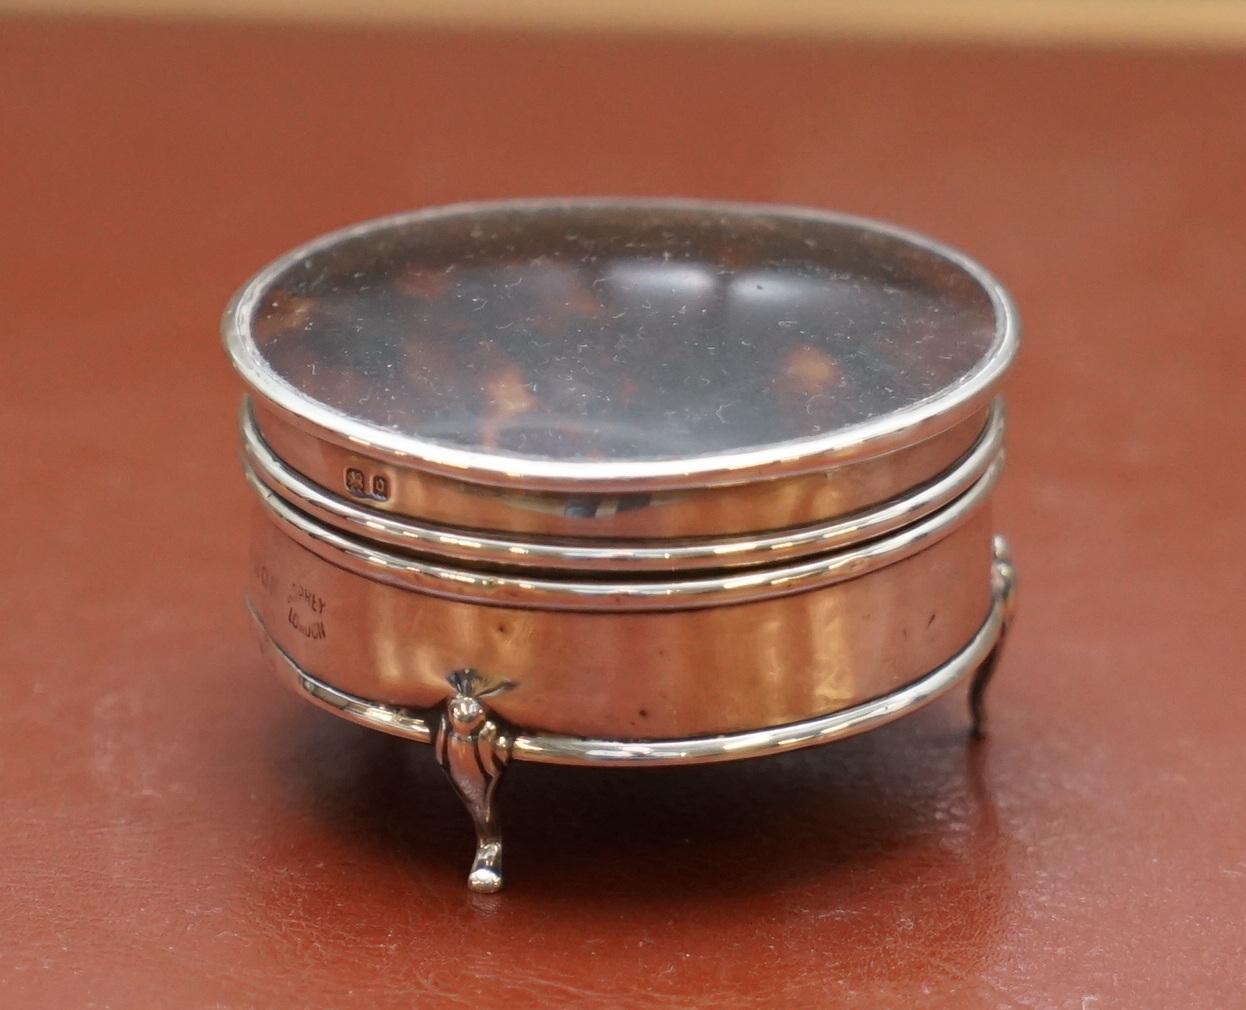 We are delighted to offer for sale this stunning original Asprey London solid sterling silver Jewelry trinket pot or box with faux tortoise shell top

A fantastic looking elegant and well-made, jewelry pot, fully hallmarked to the lid and base and